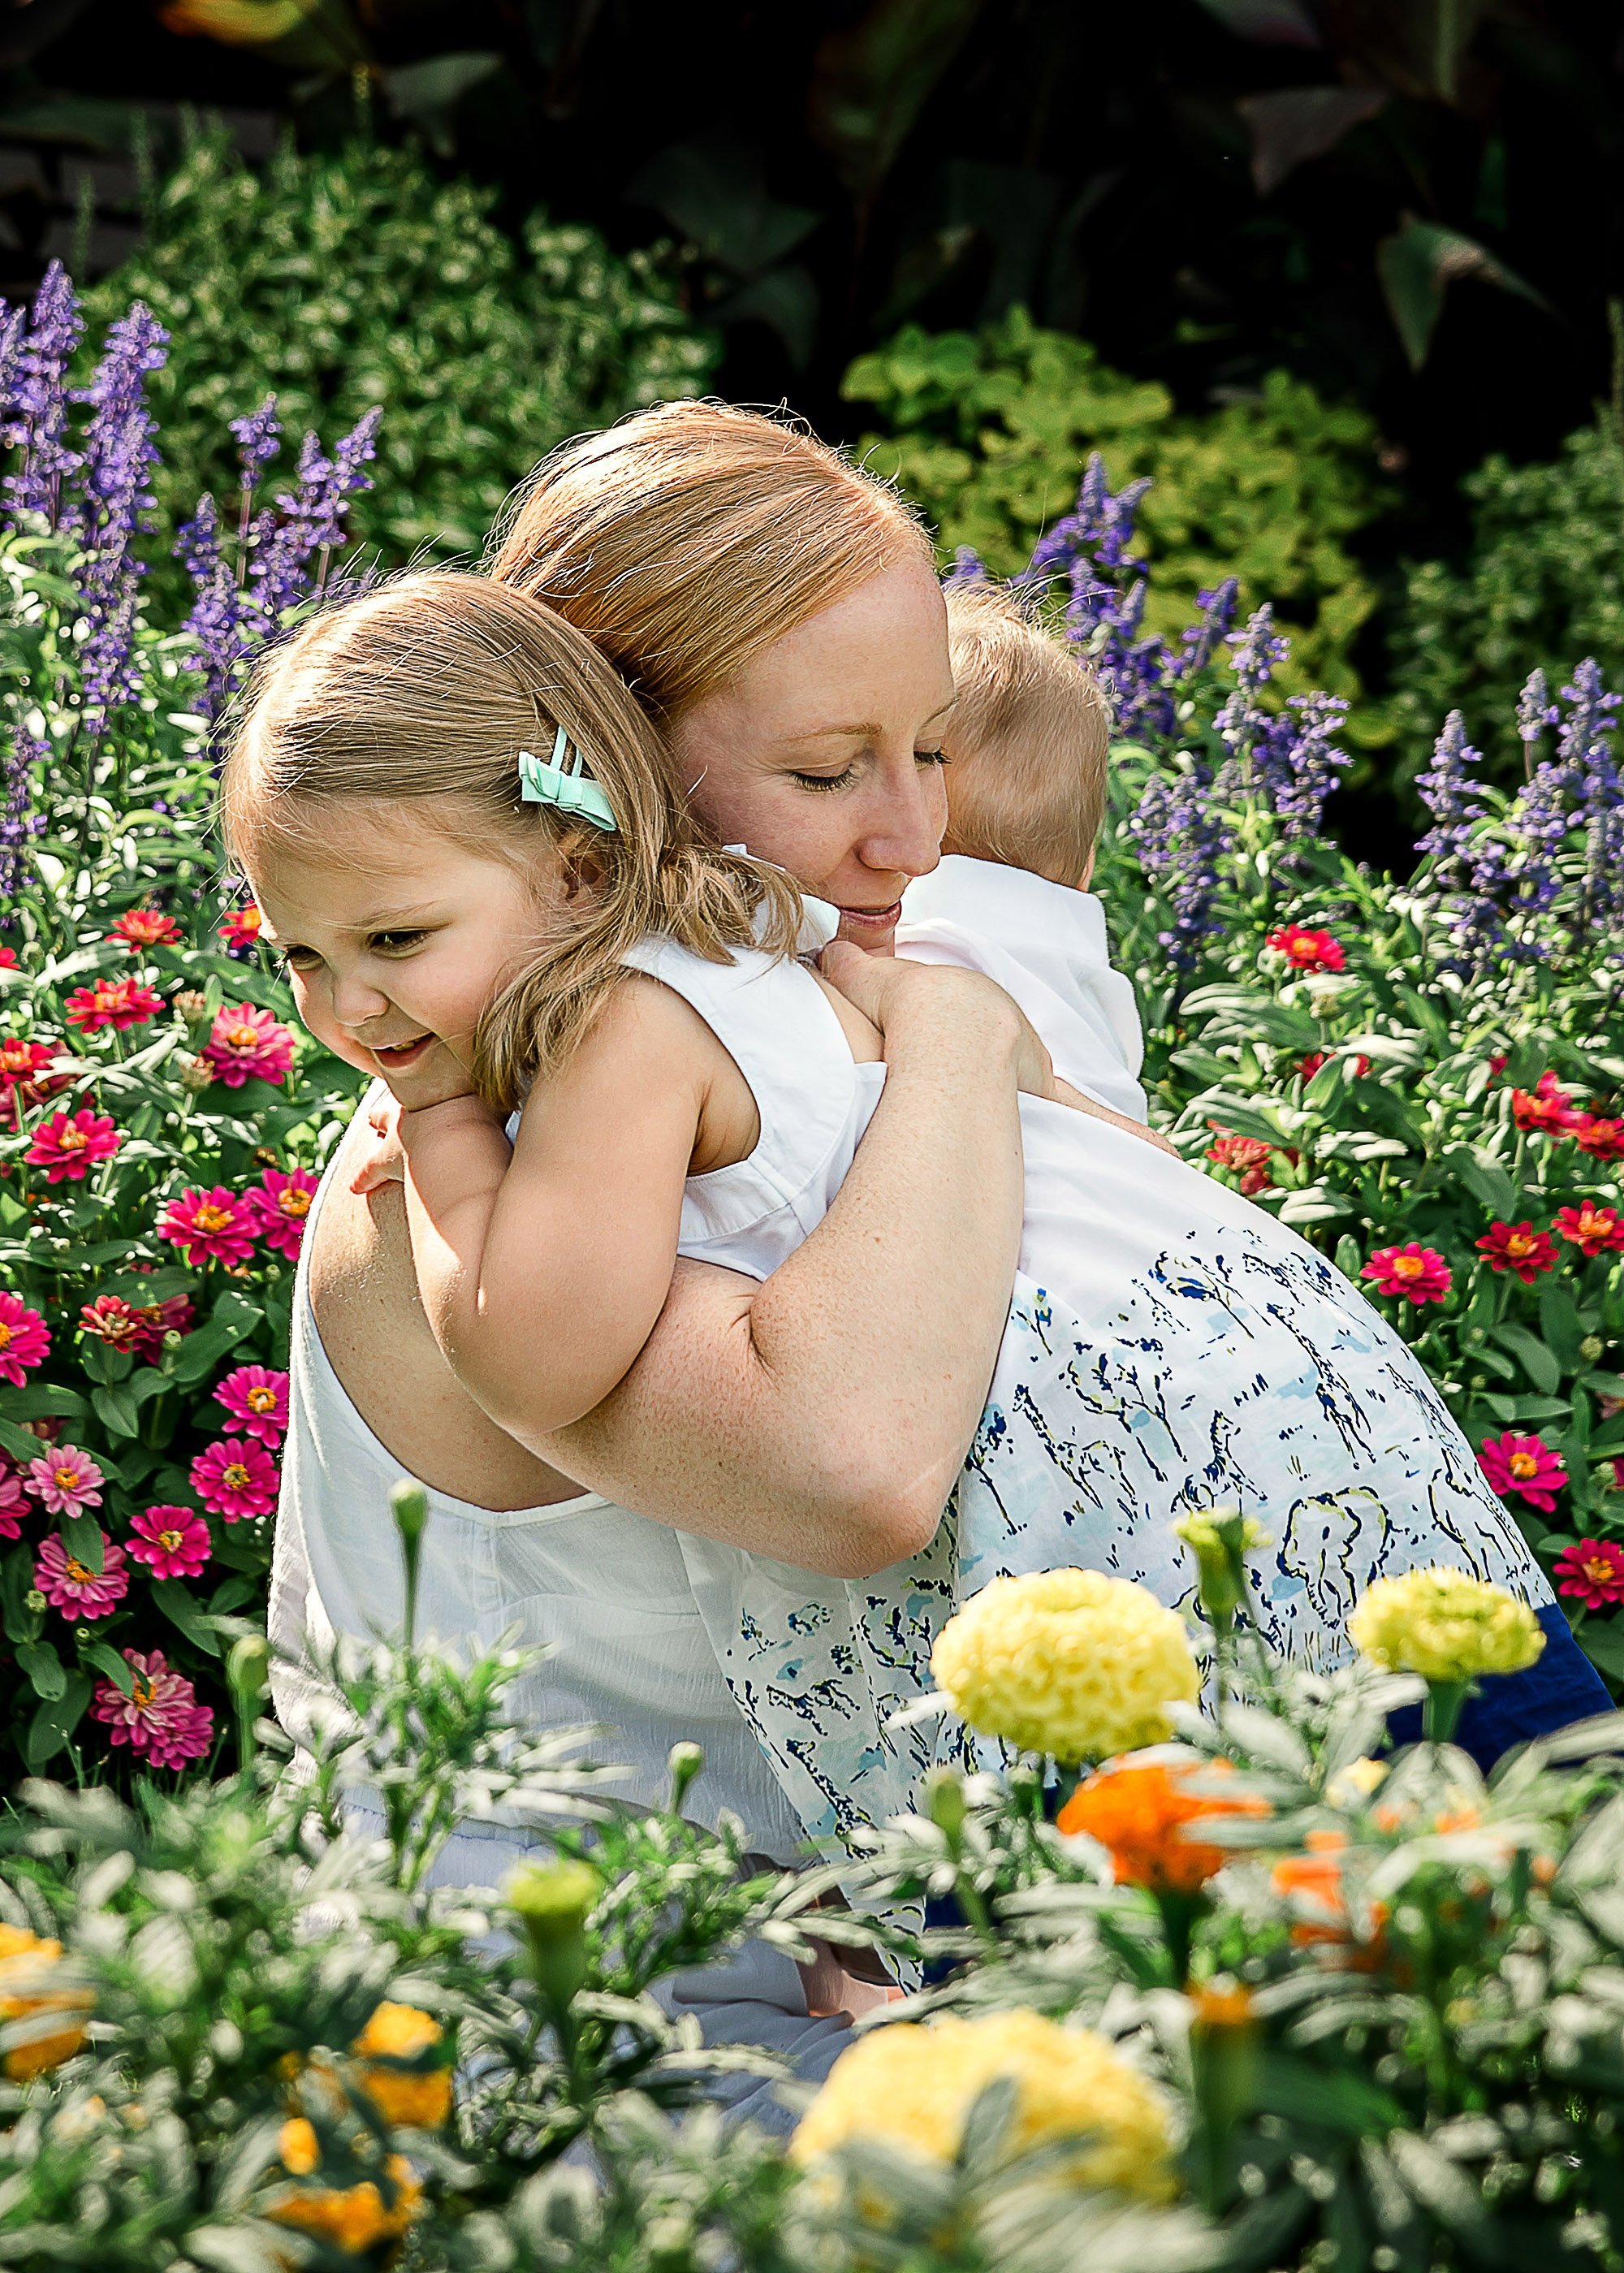 Momma hugging both of her small children in the garden surrounded by flowers